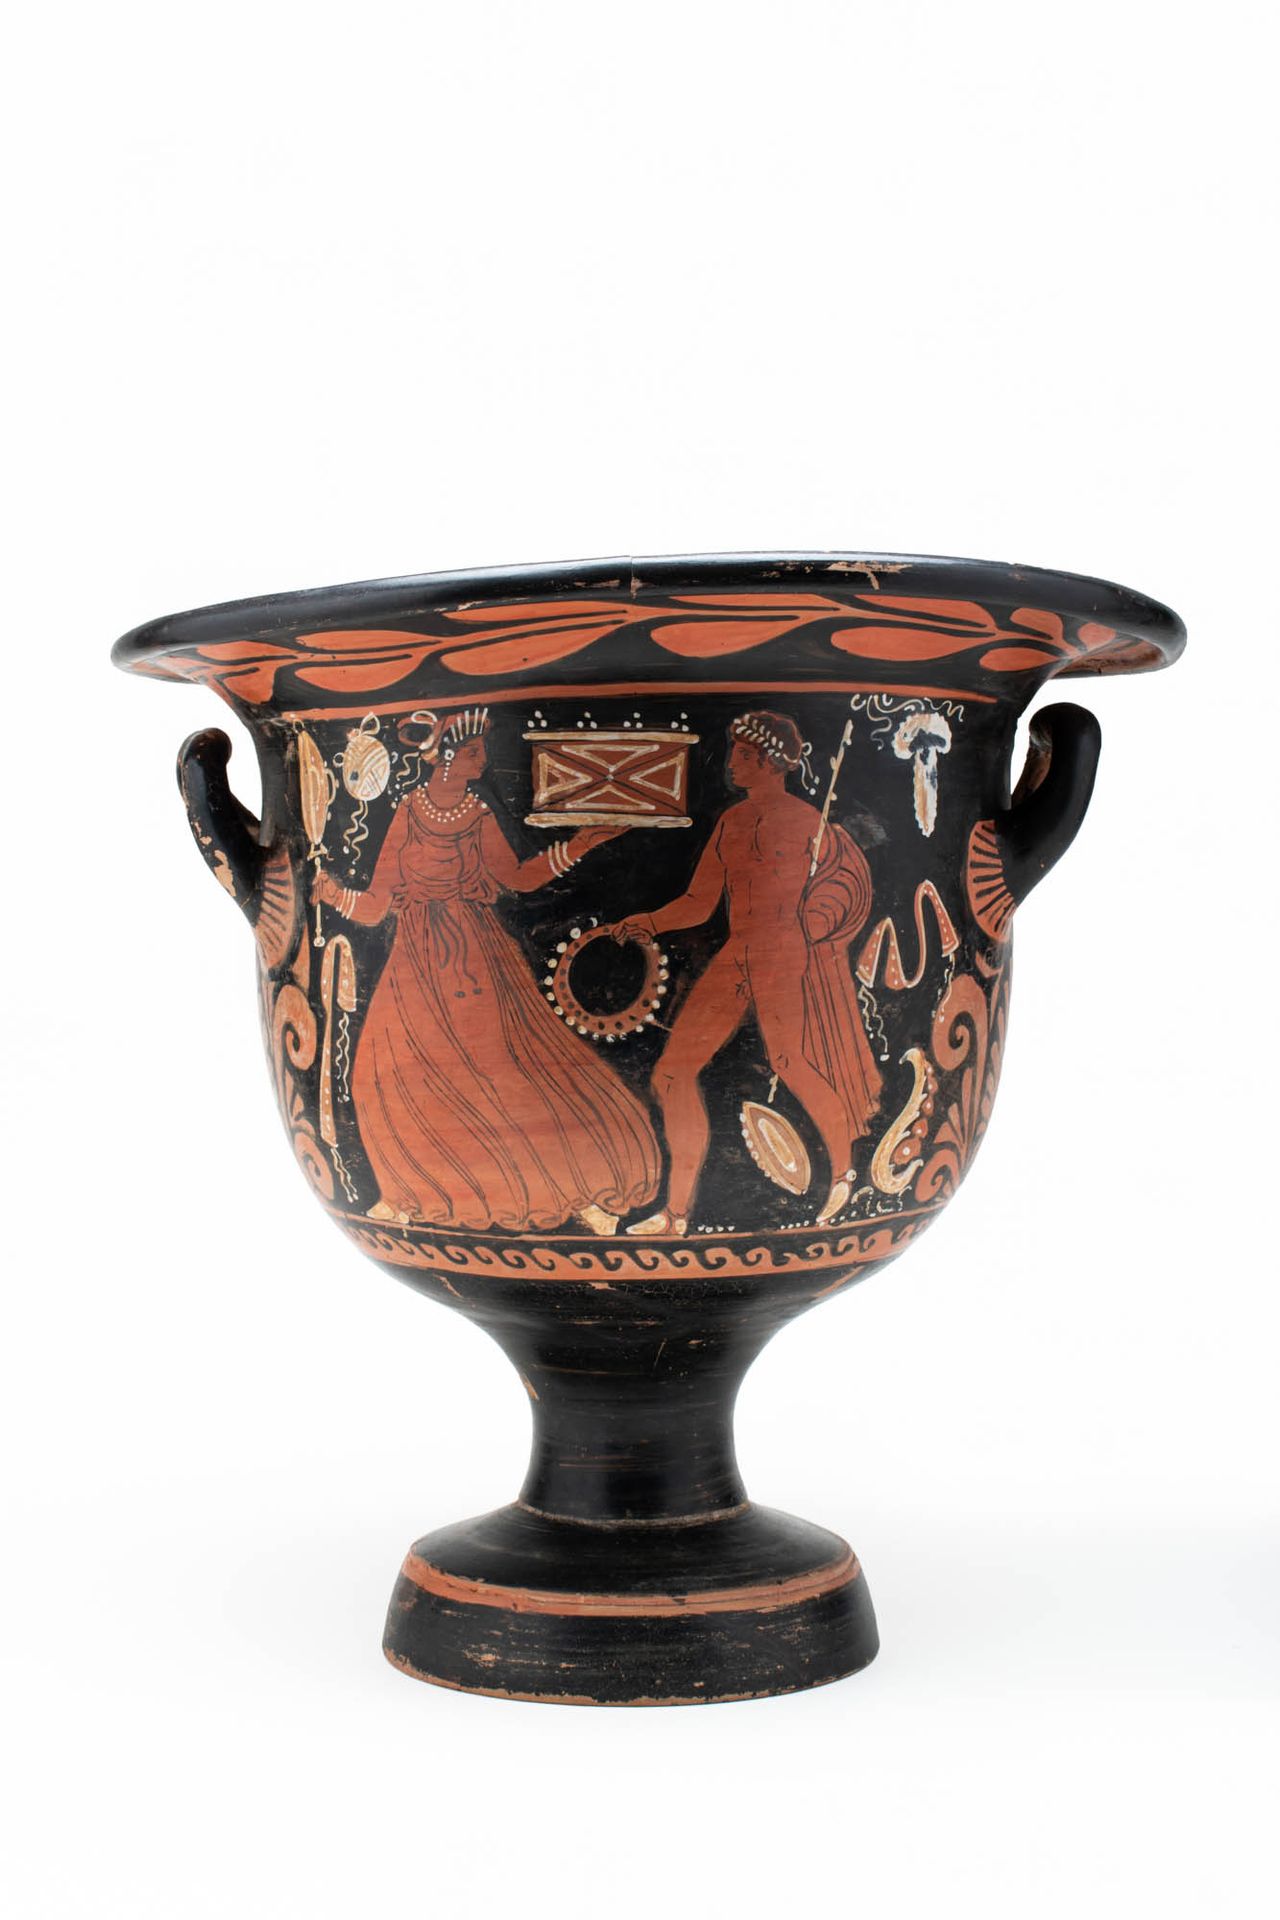 GREEK APULIAN RED-FIGURE BELL KRATER Ca. Late 4th century BC.
A red-figure bell &hellip;